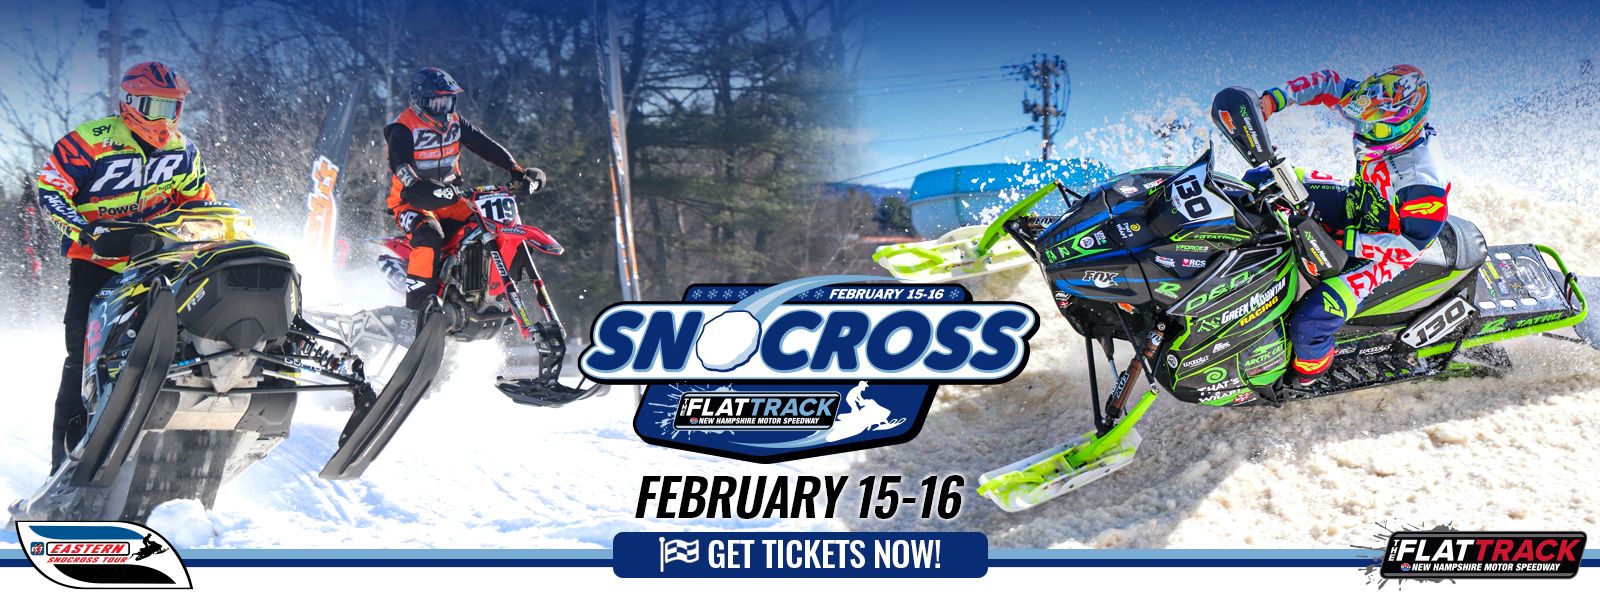 Snocross at The Flat Track